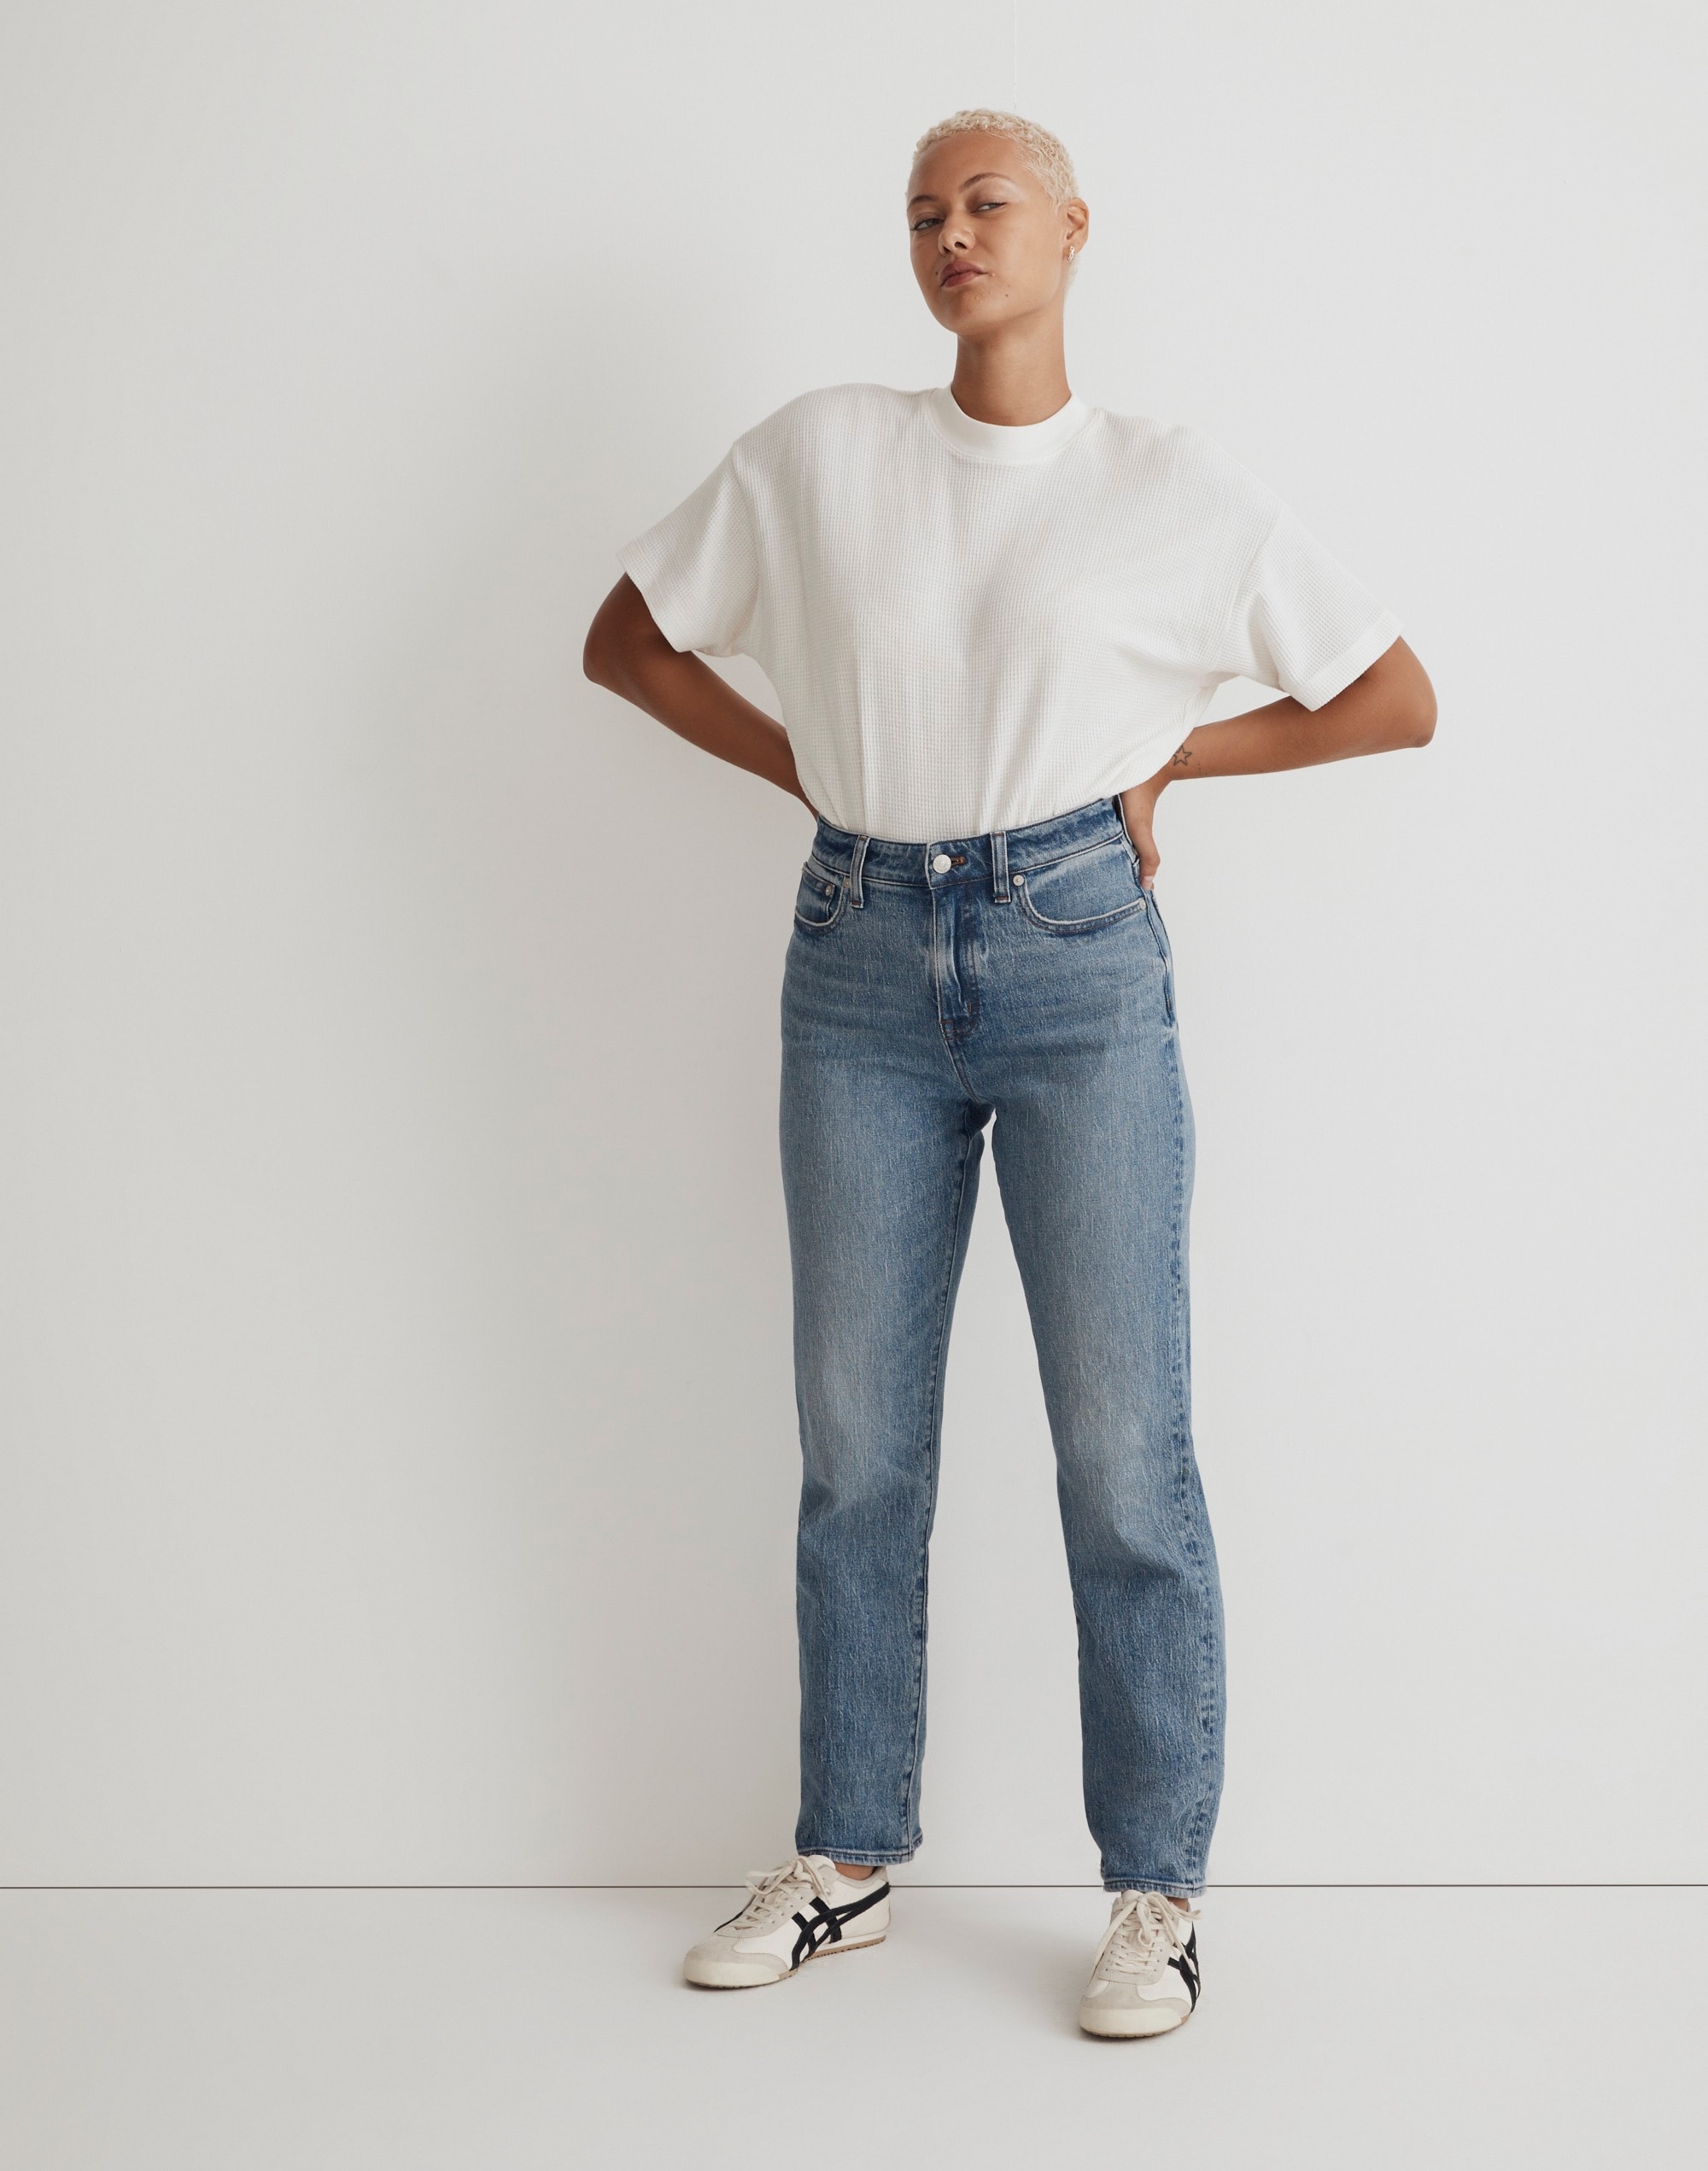 17 Cool '90s Jeans for Fall 2020: Levi's, Madewell & More